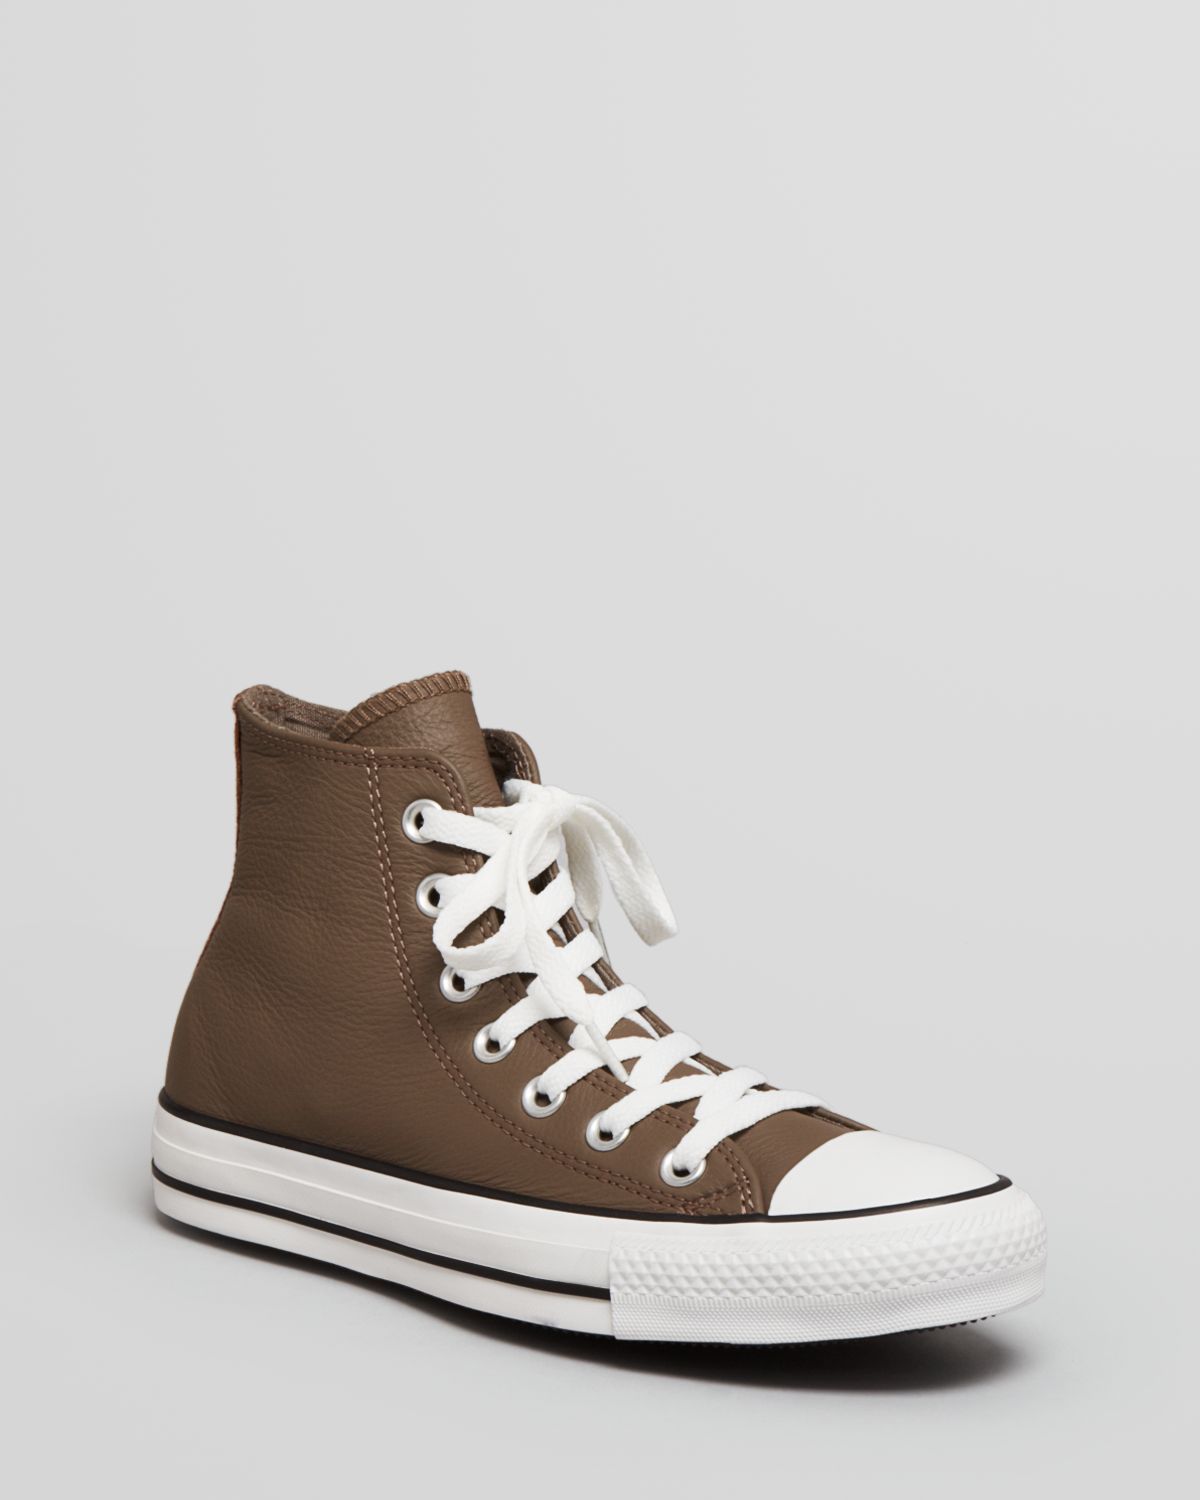 Converse Unisex Leather High Tops Chuck Taylor in Brown - Lyst